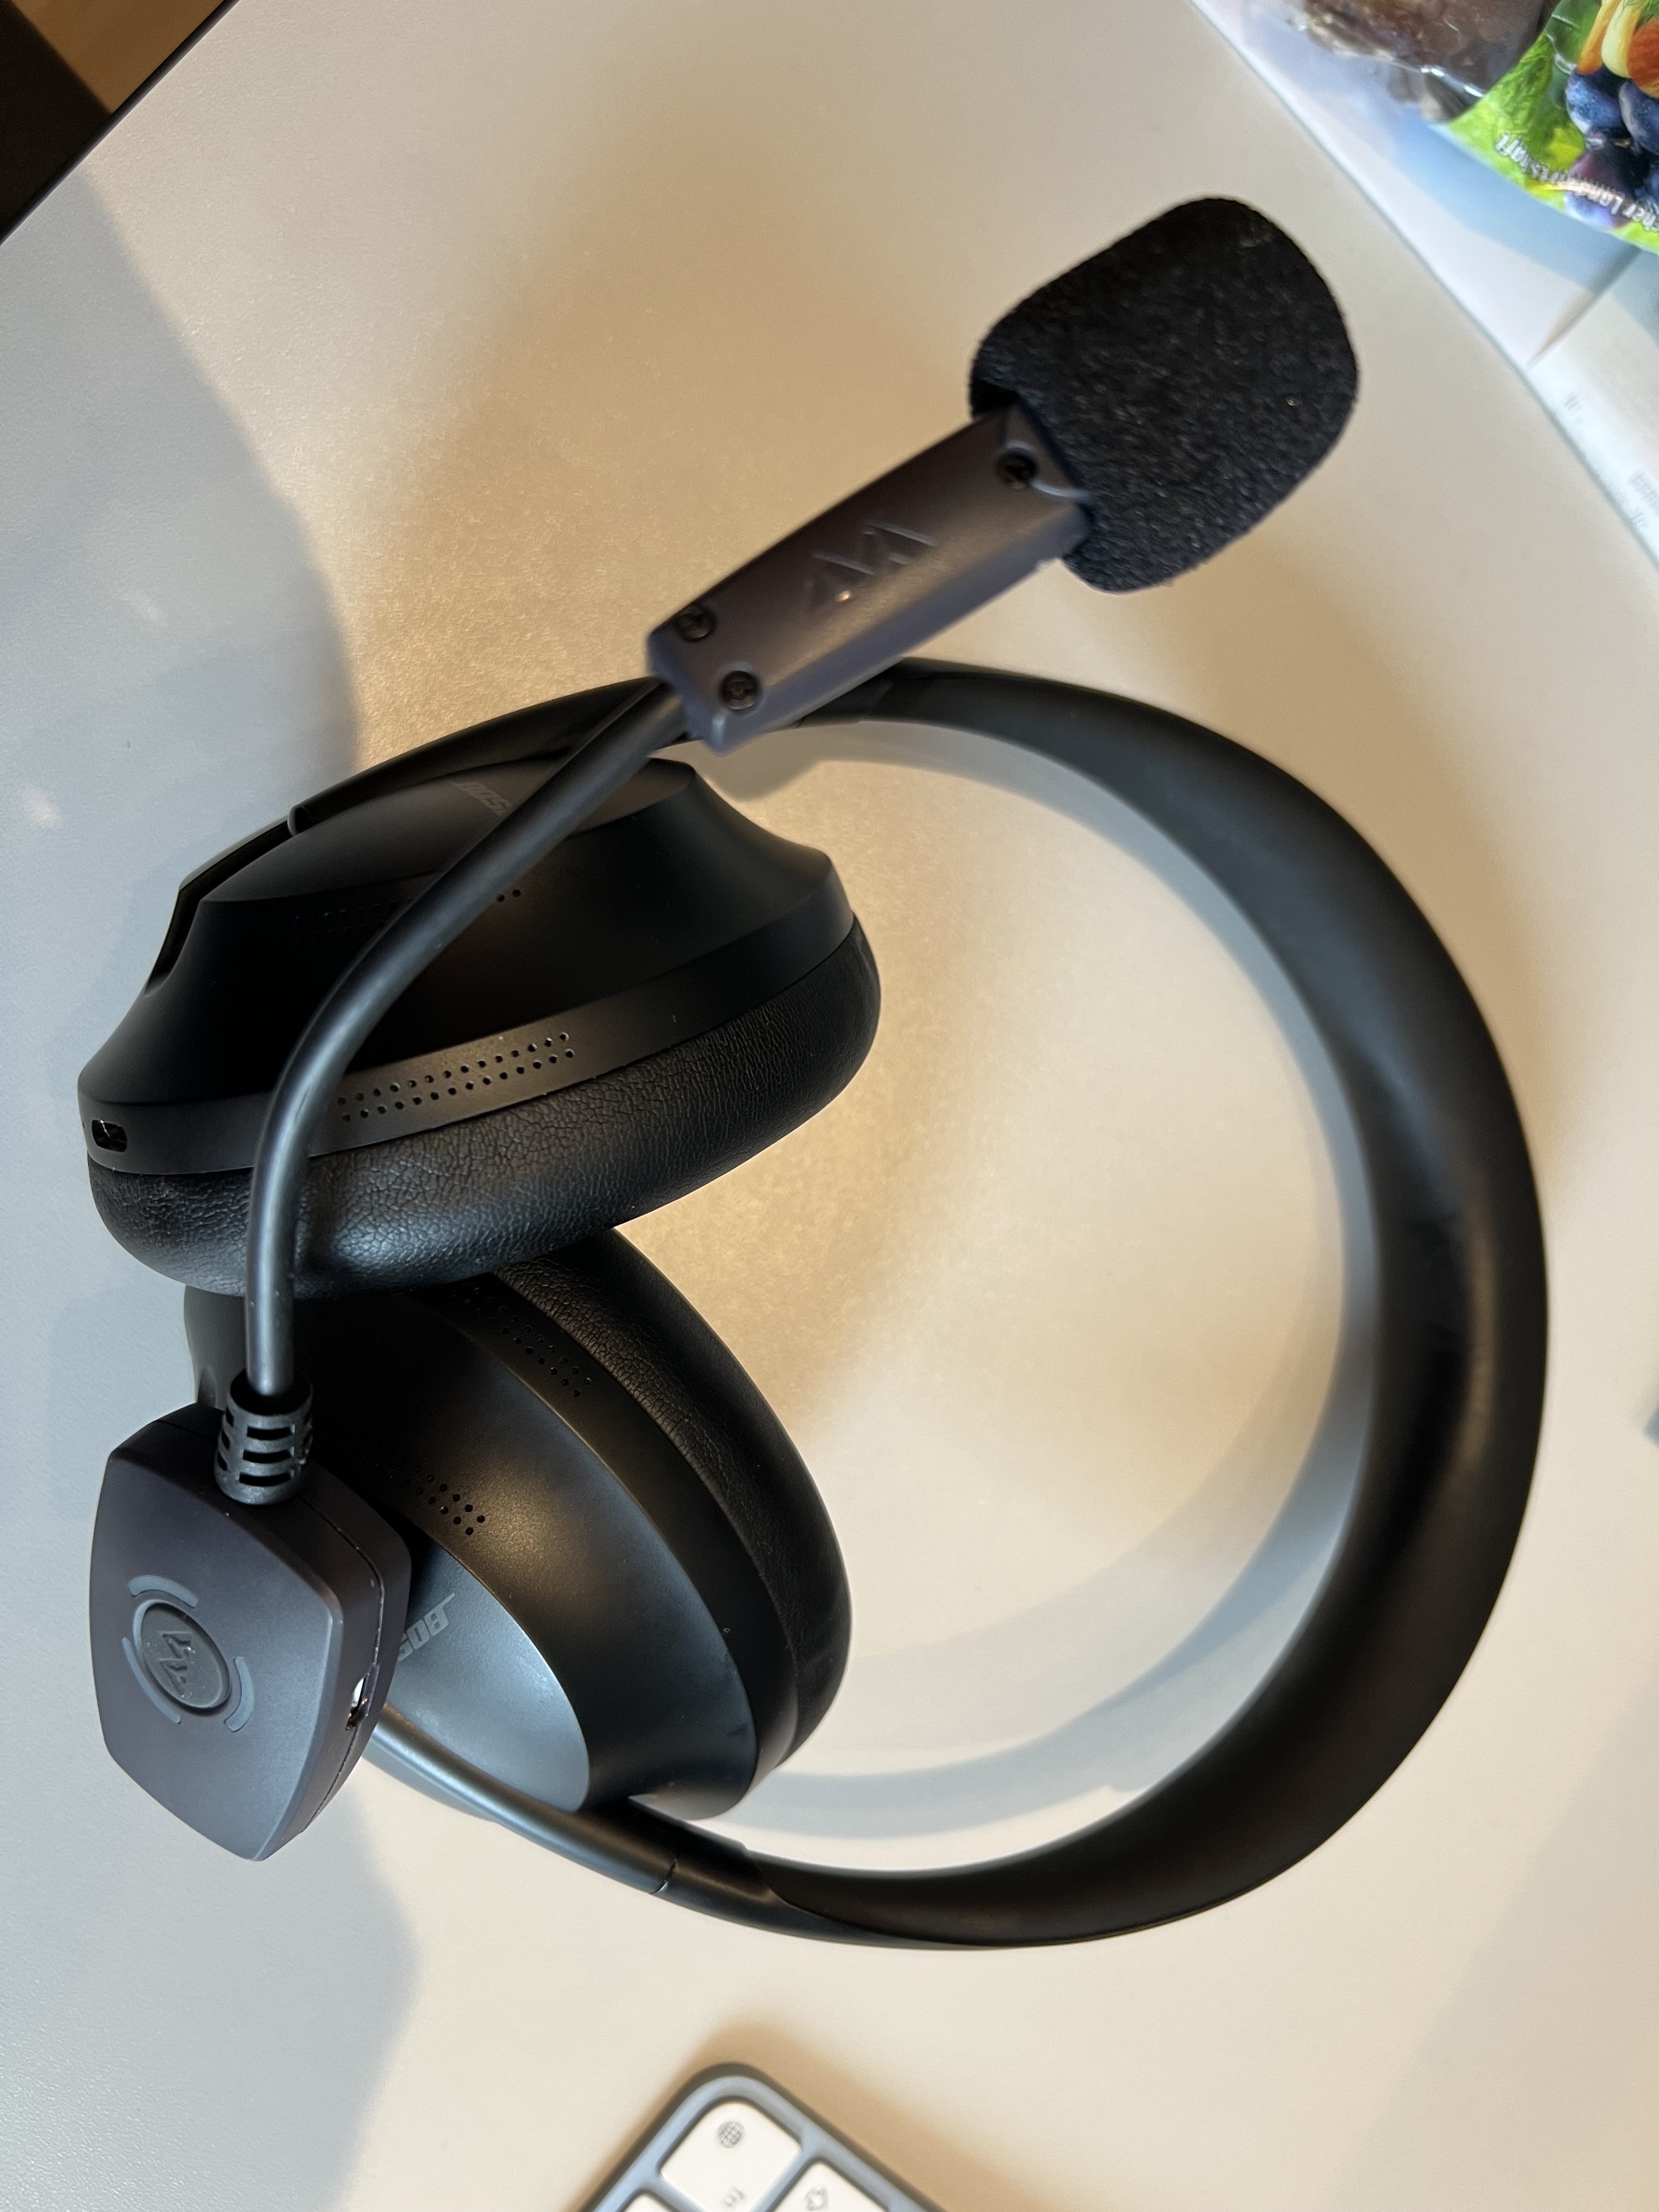 ModMic and headset